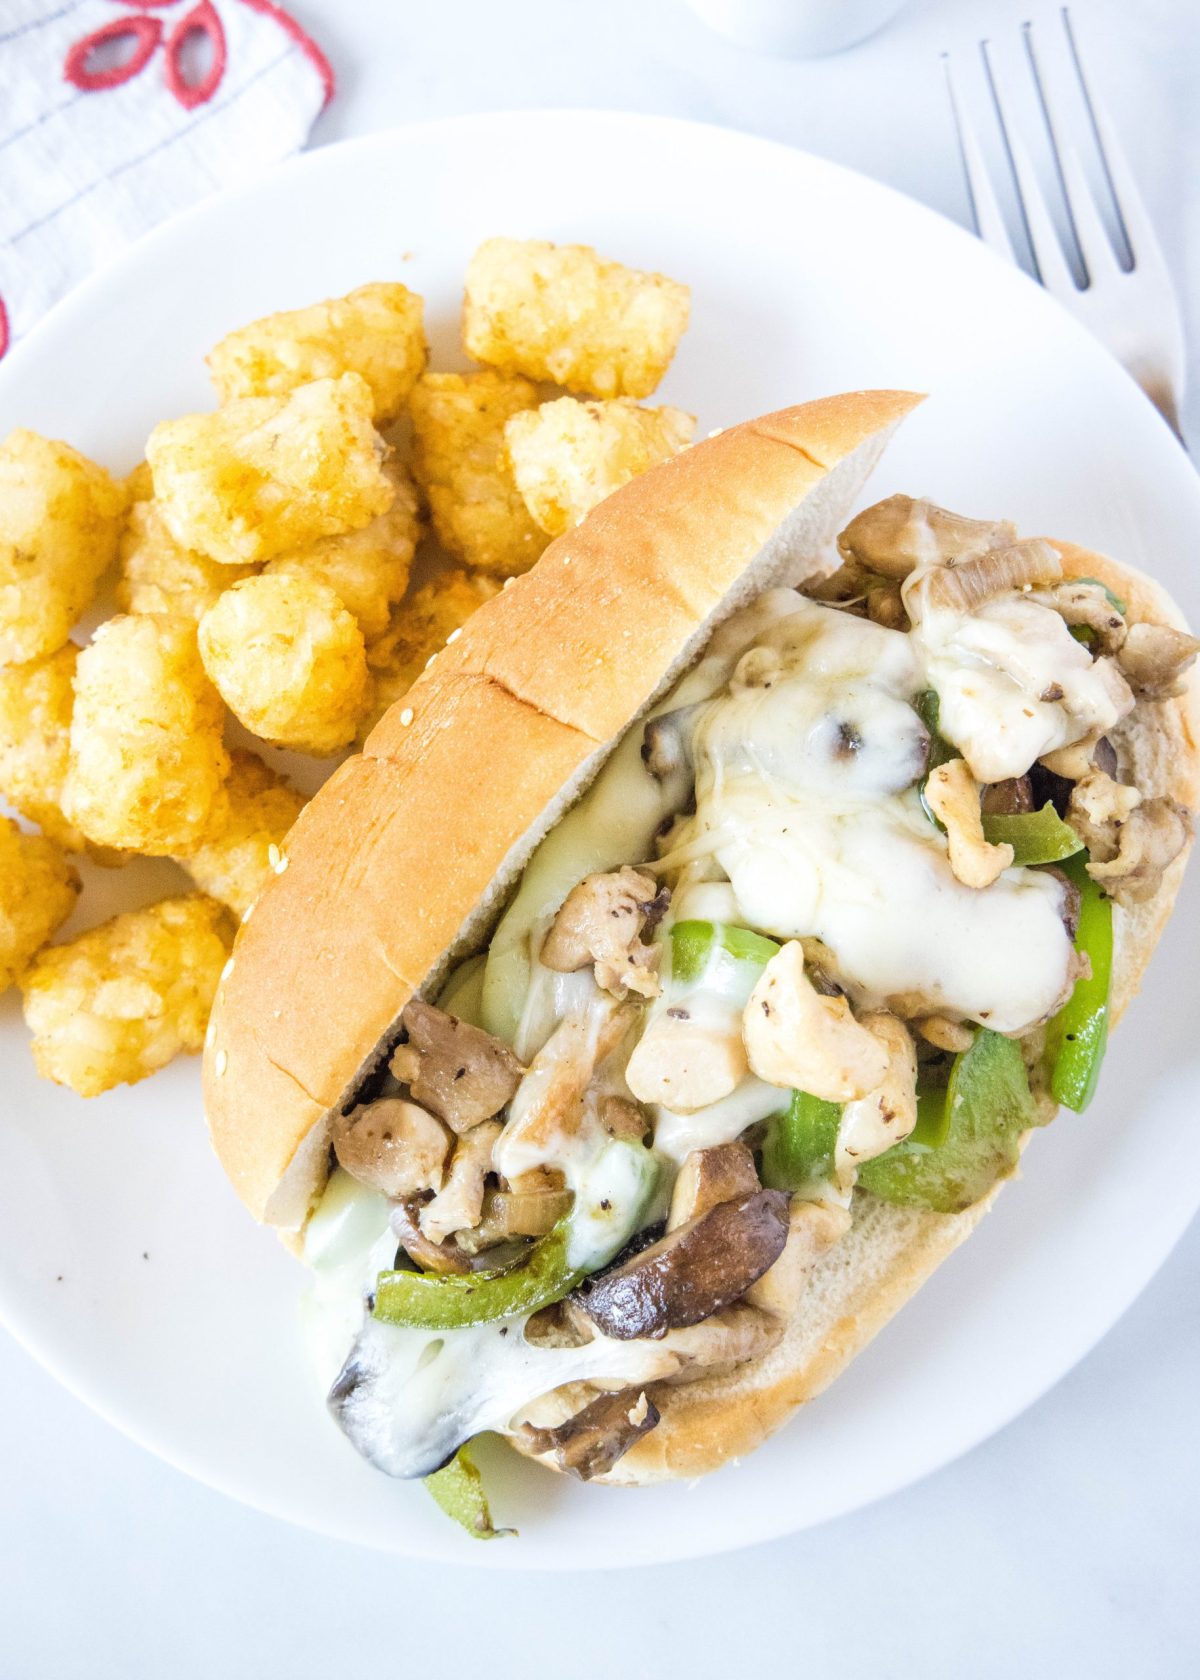 Overhead view of a chicken Philly cheesesteak on a plate next to some tater tots, with a fork on the side